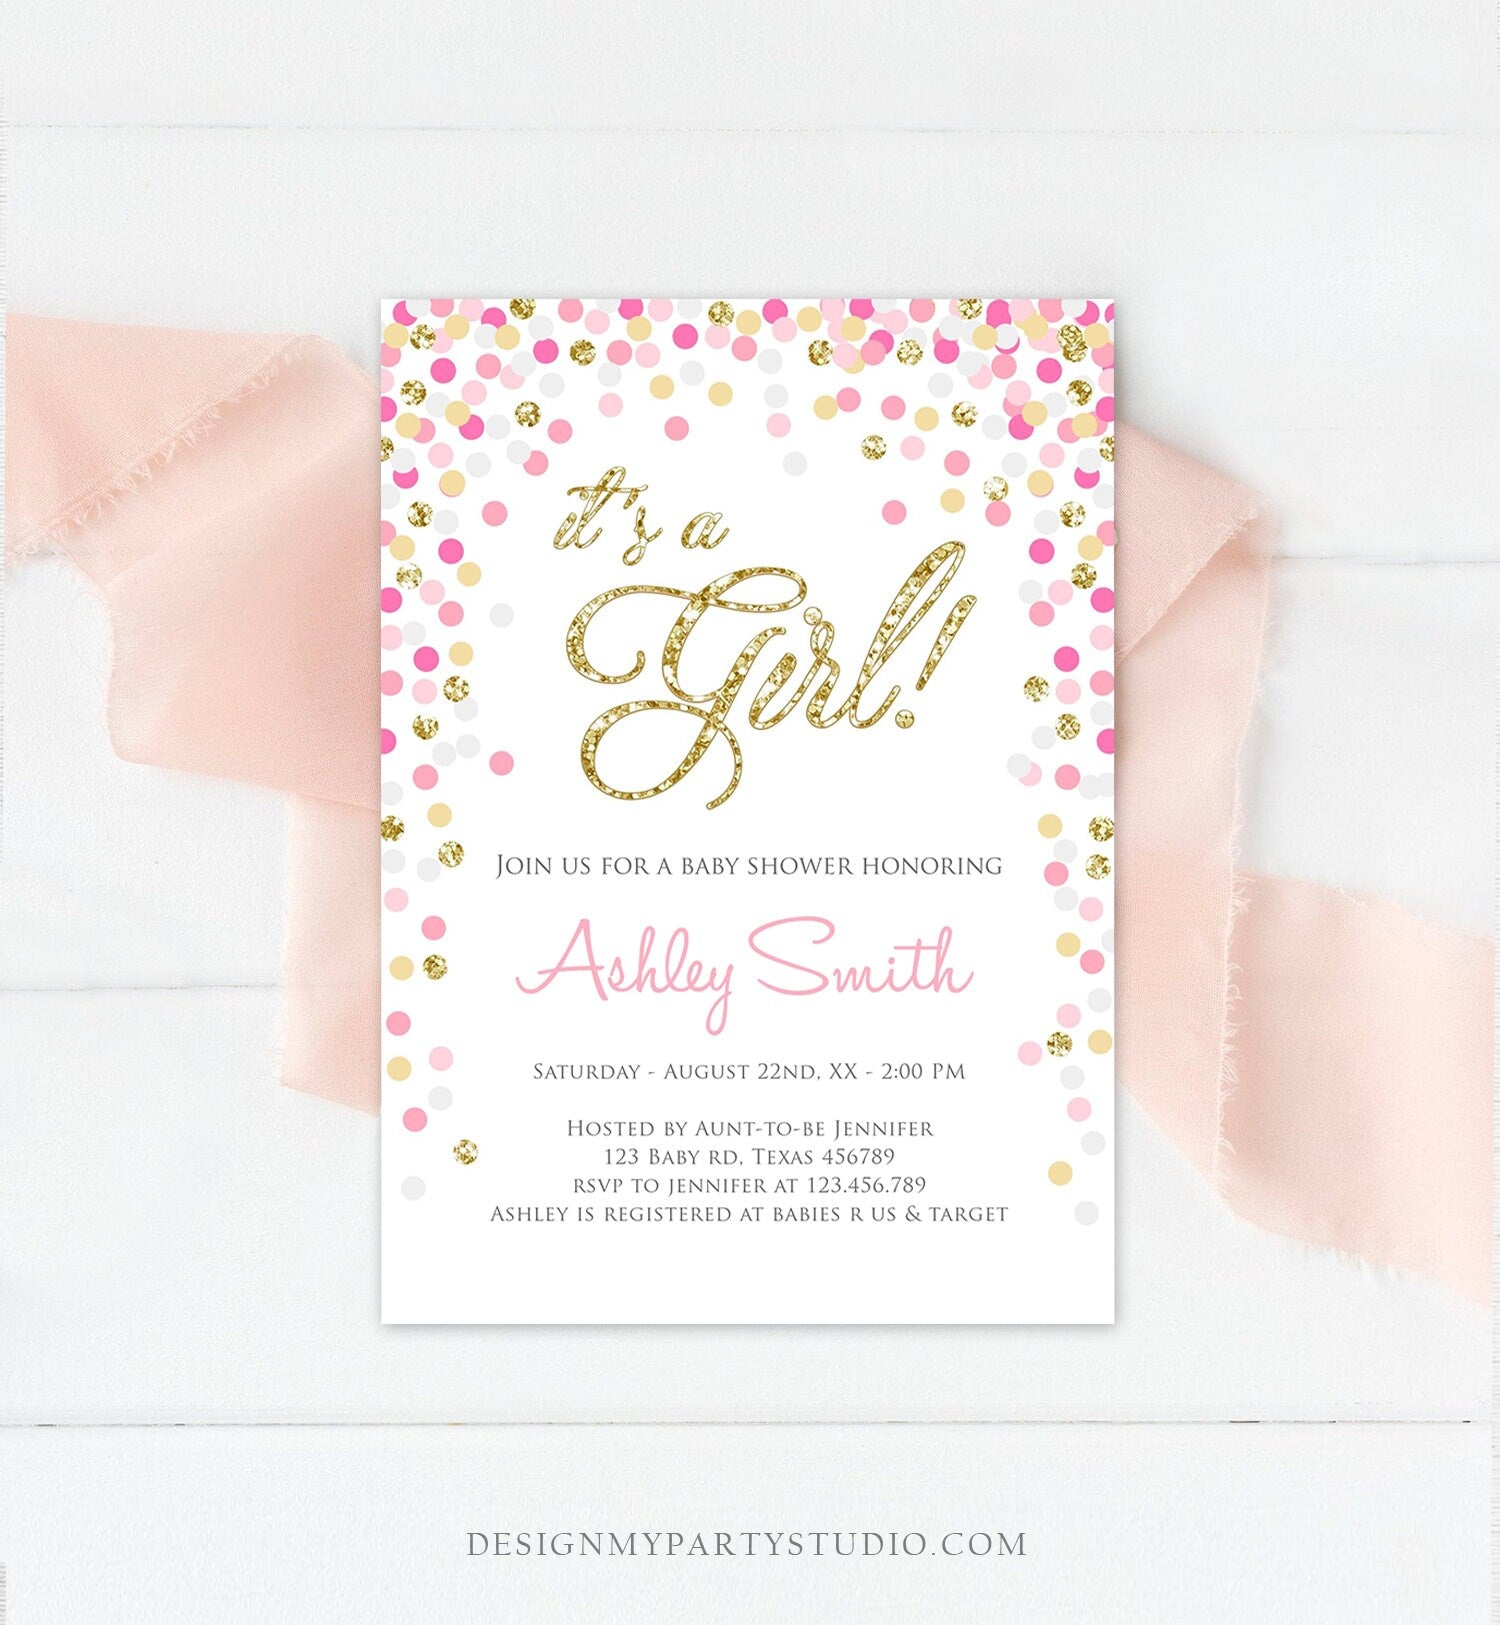 Editable Confetti Baby Shower Invitation Confetti It's a Girl Pink Gold Glitter Baby Sprinkle Download Corjl Template Printable 0133